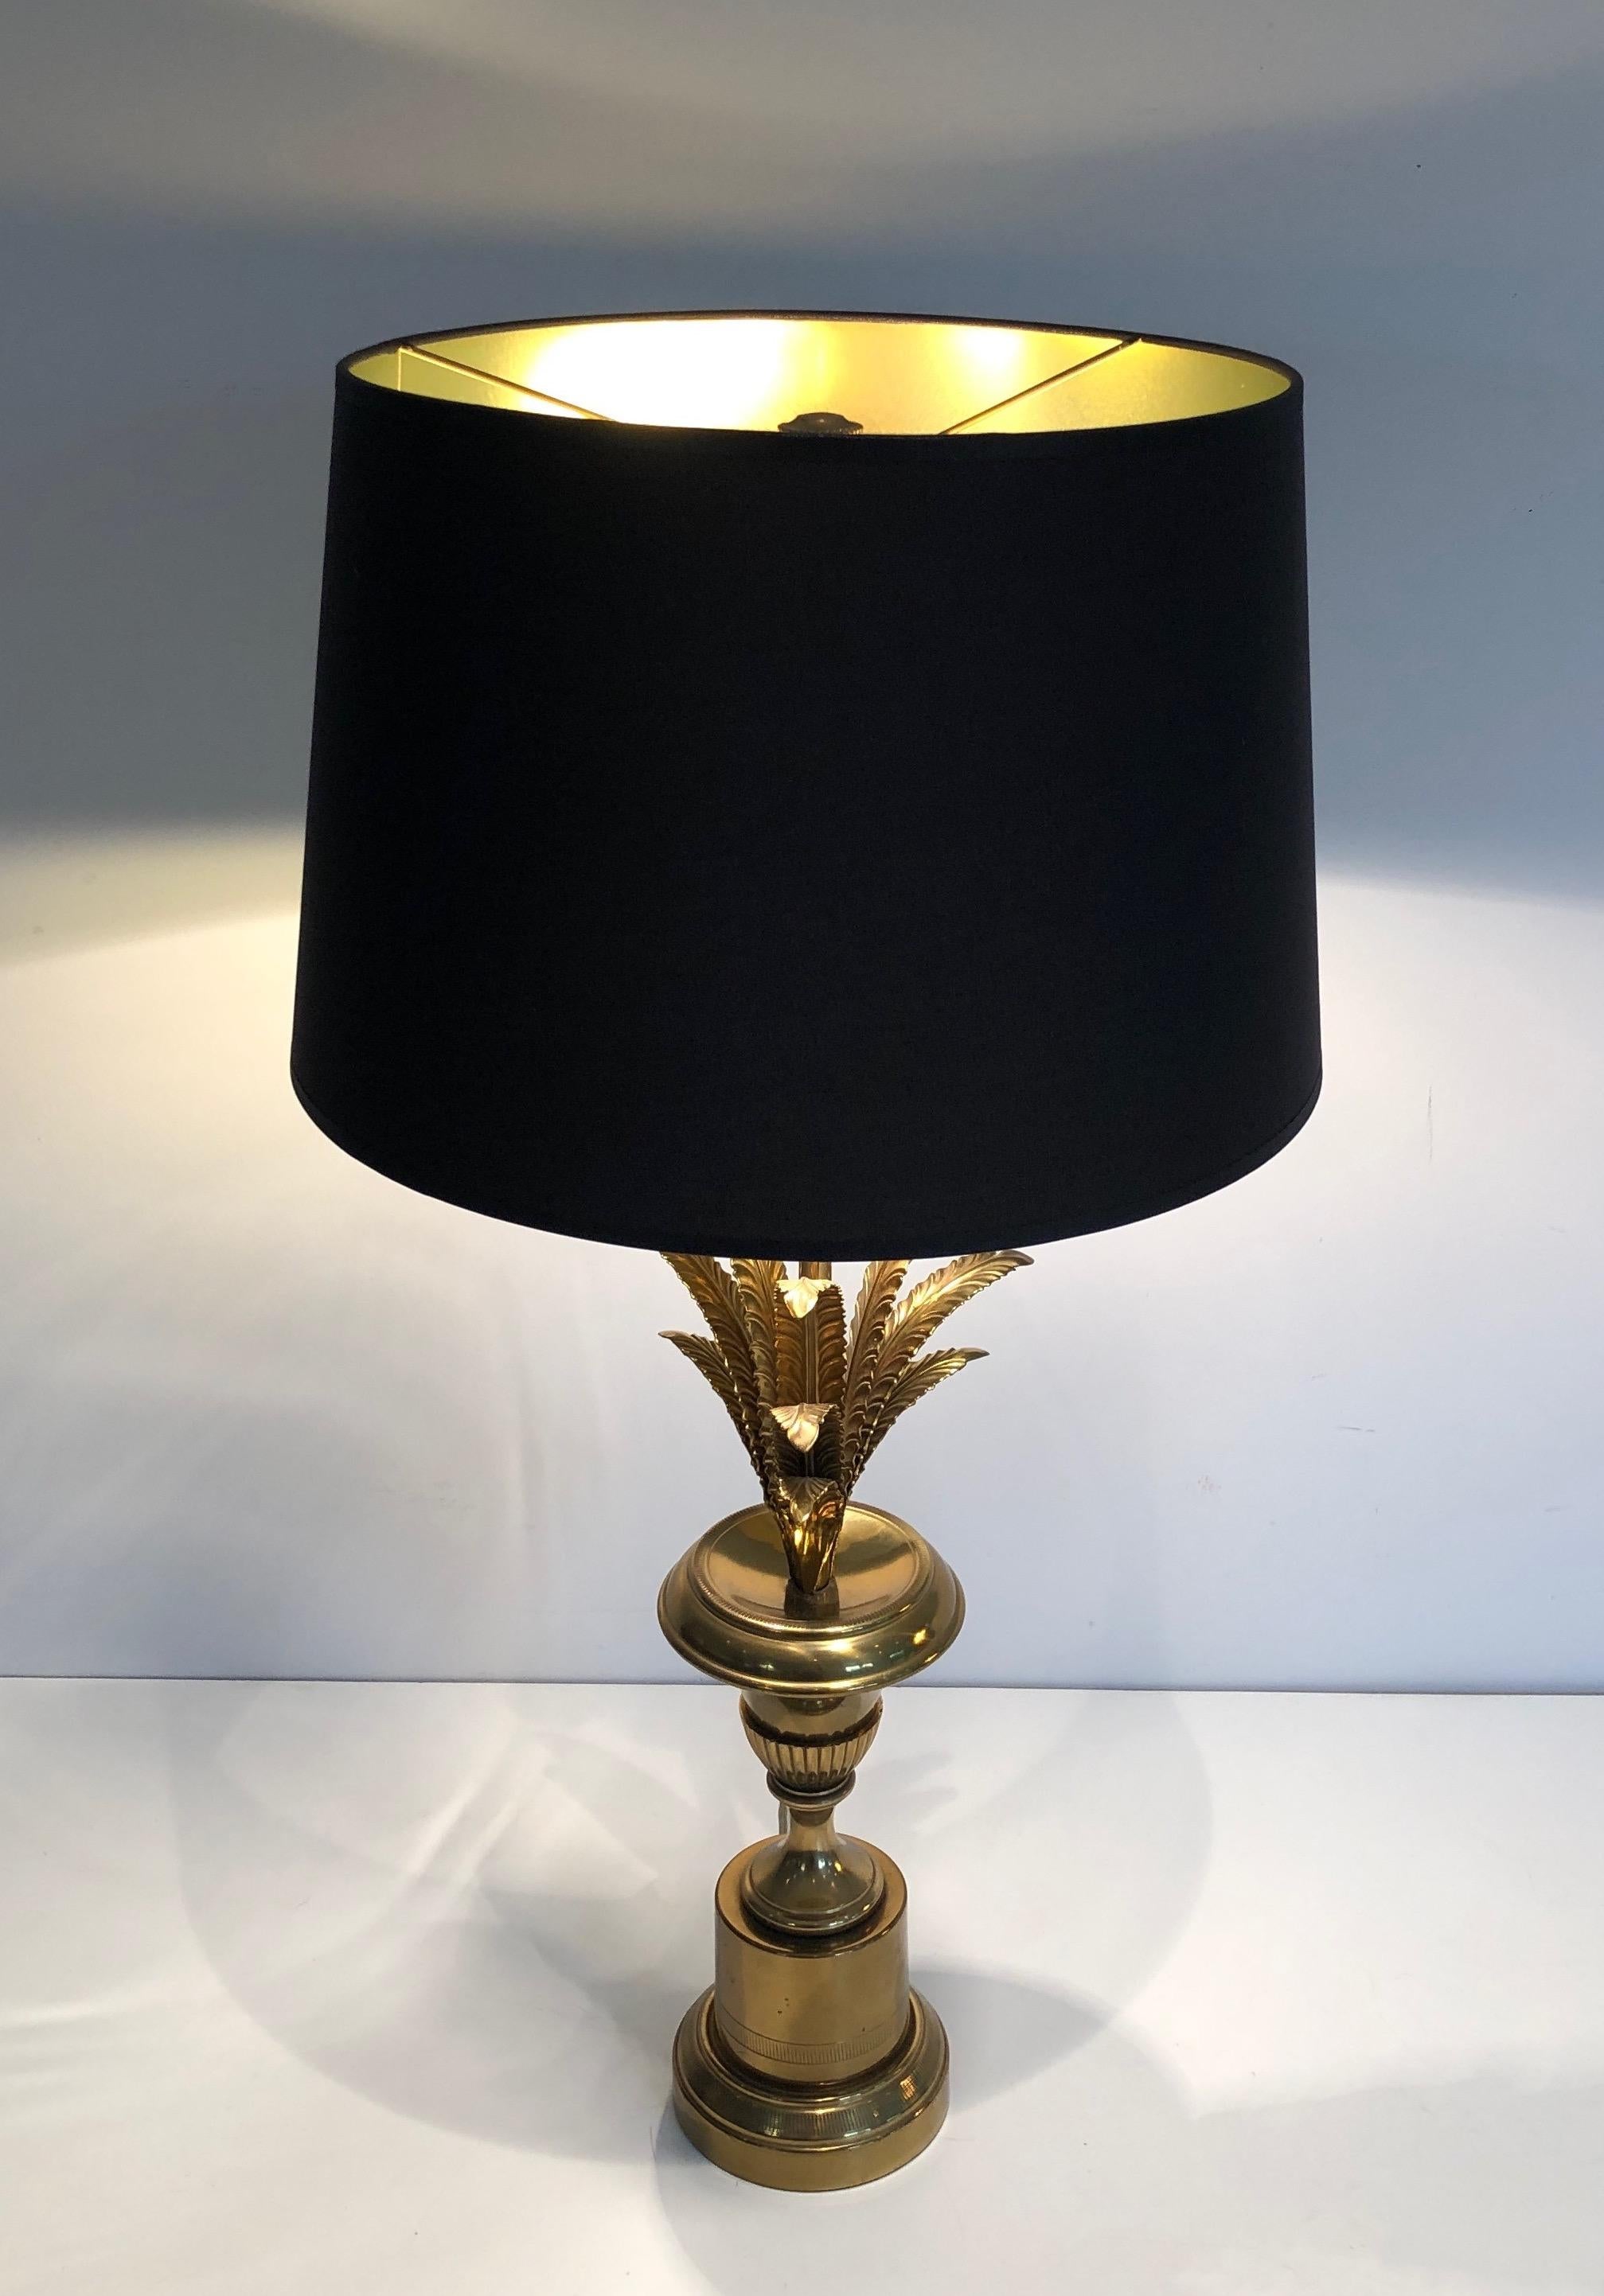 This very nice and elegant neoclassical style palm tree table lamp is made of brass. This is a French work in the Style of Maison Charles. Circa 1970